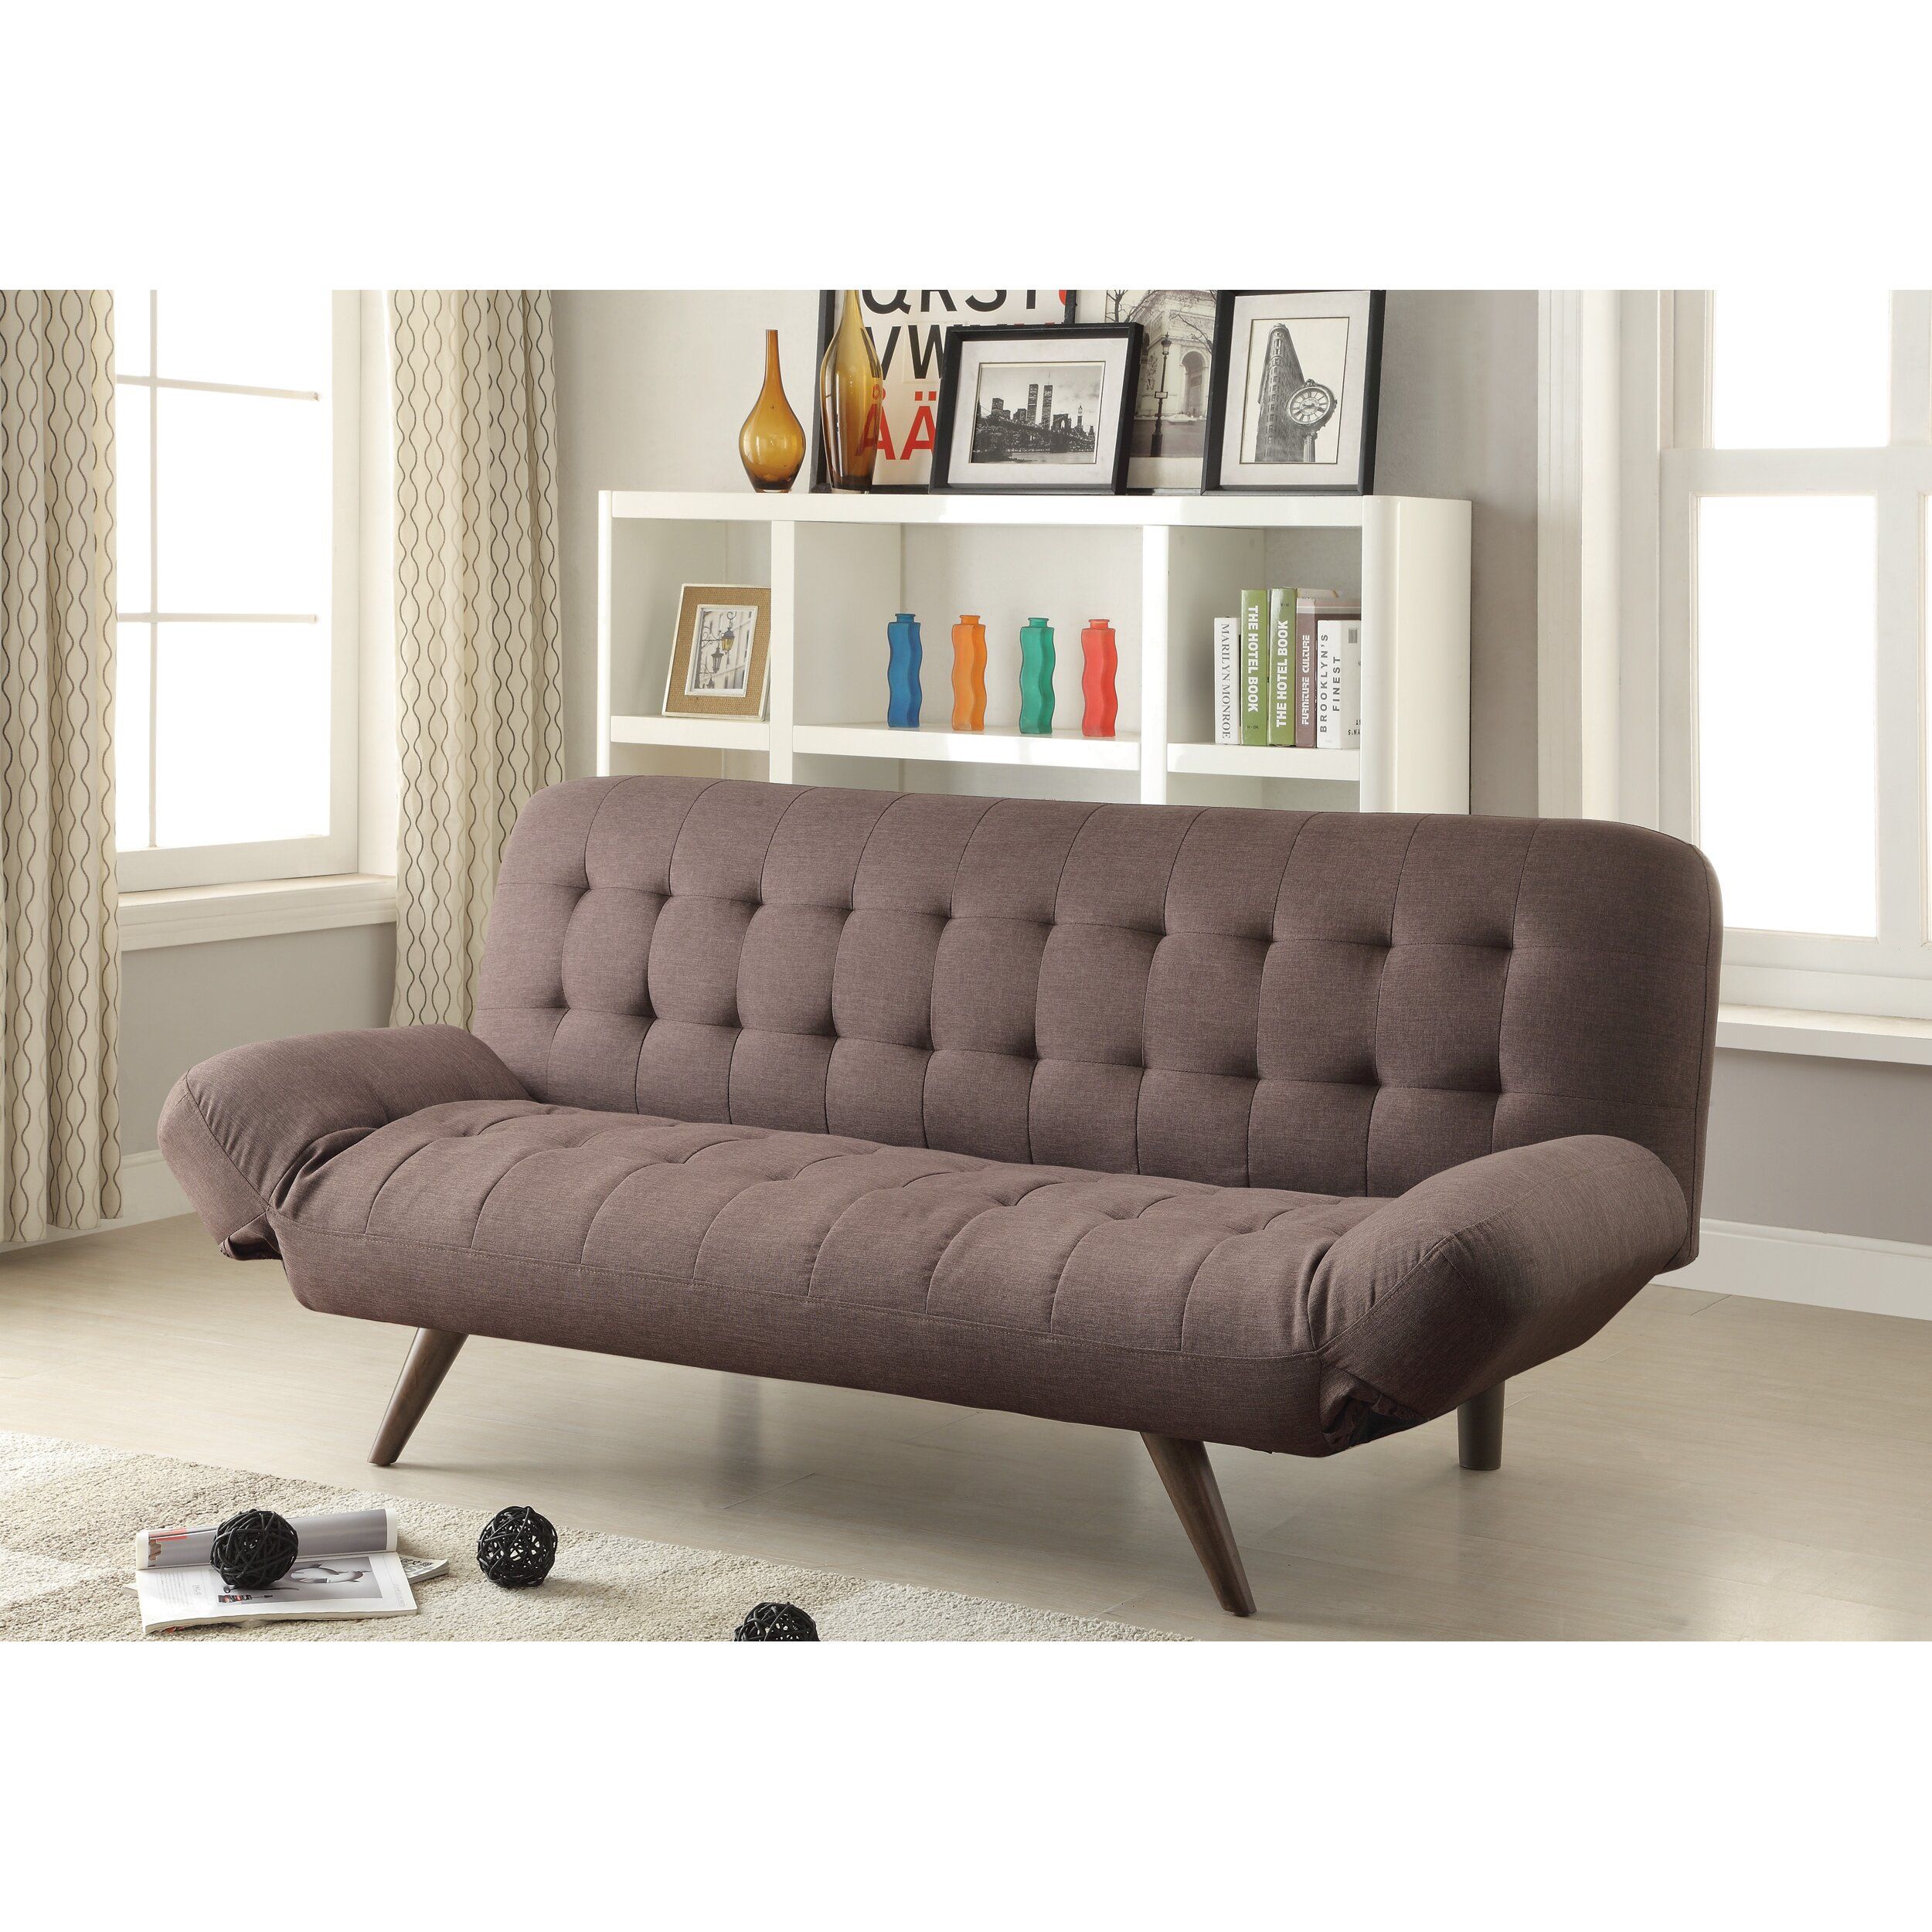 Wildon Home ® Tufted Convertible Sleeper Sofa In Brown & Reviews | Wayfair For Tufted Convertible Sleeper Sofas (Gallery 5 of 20)